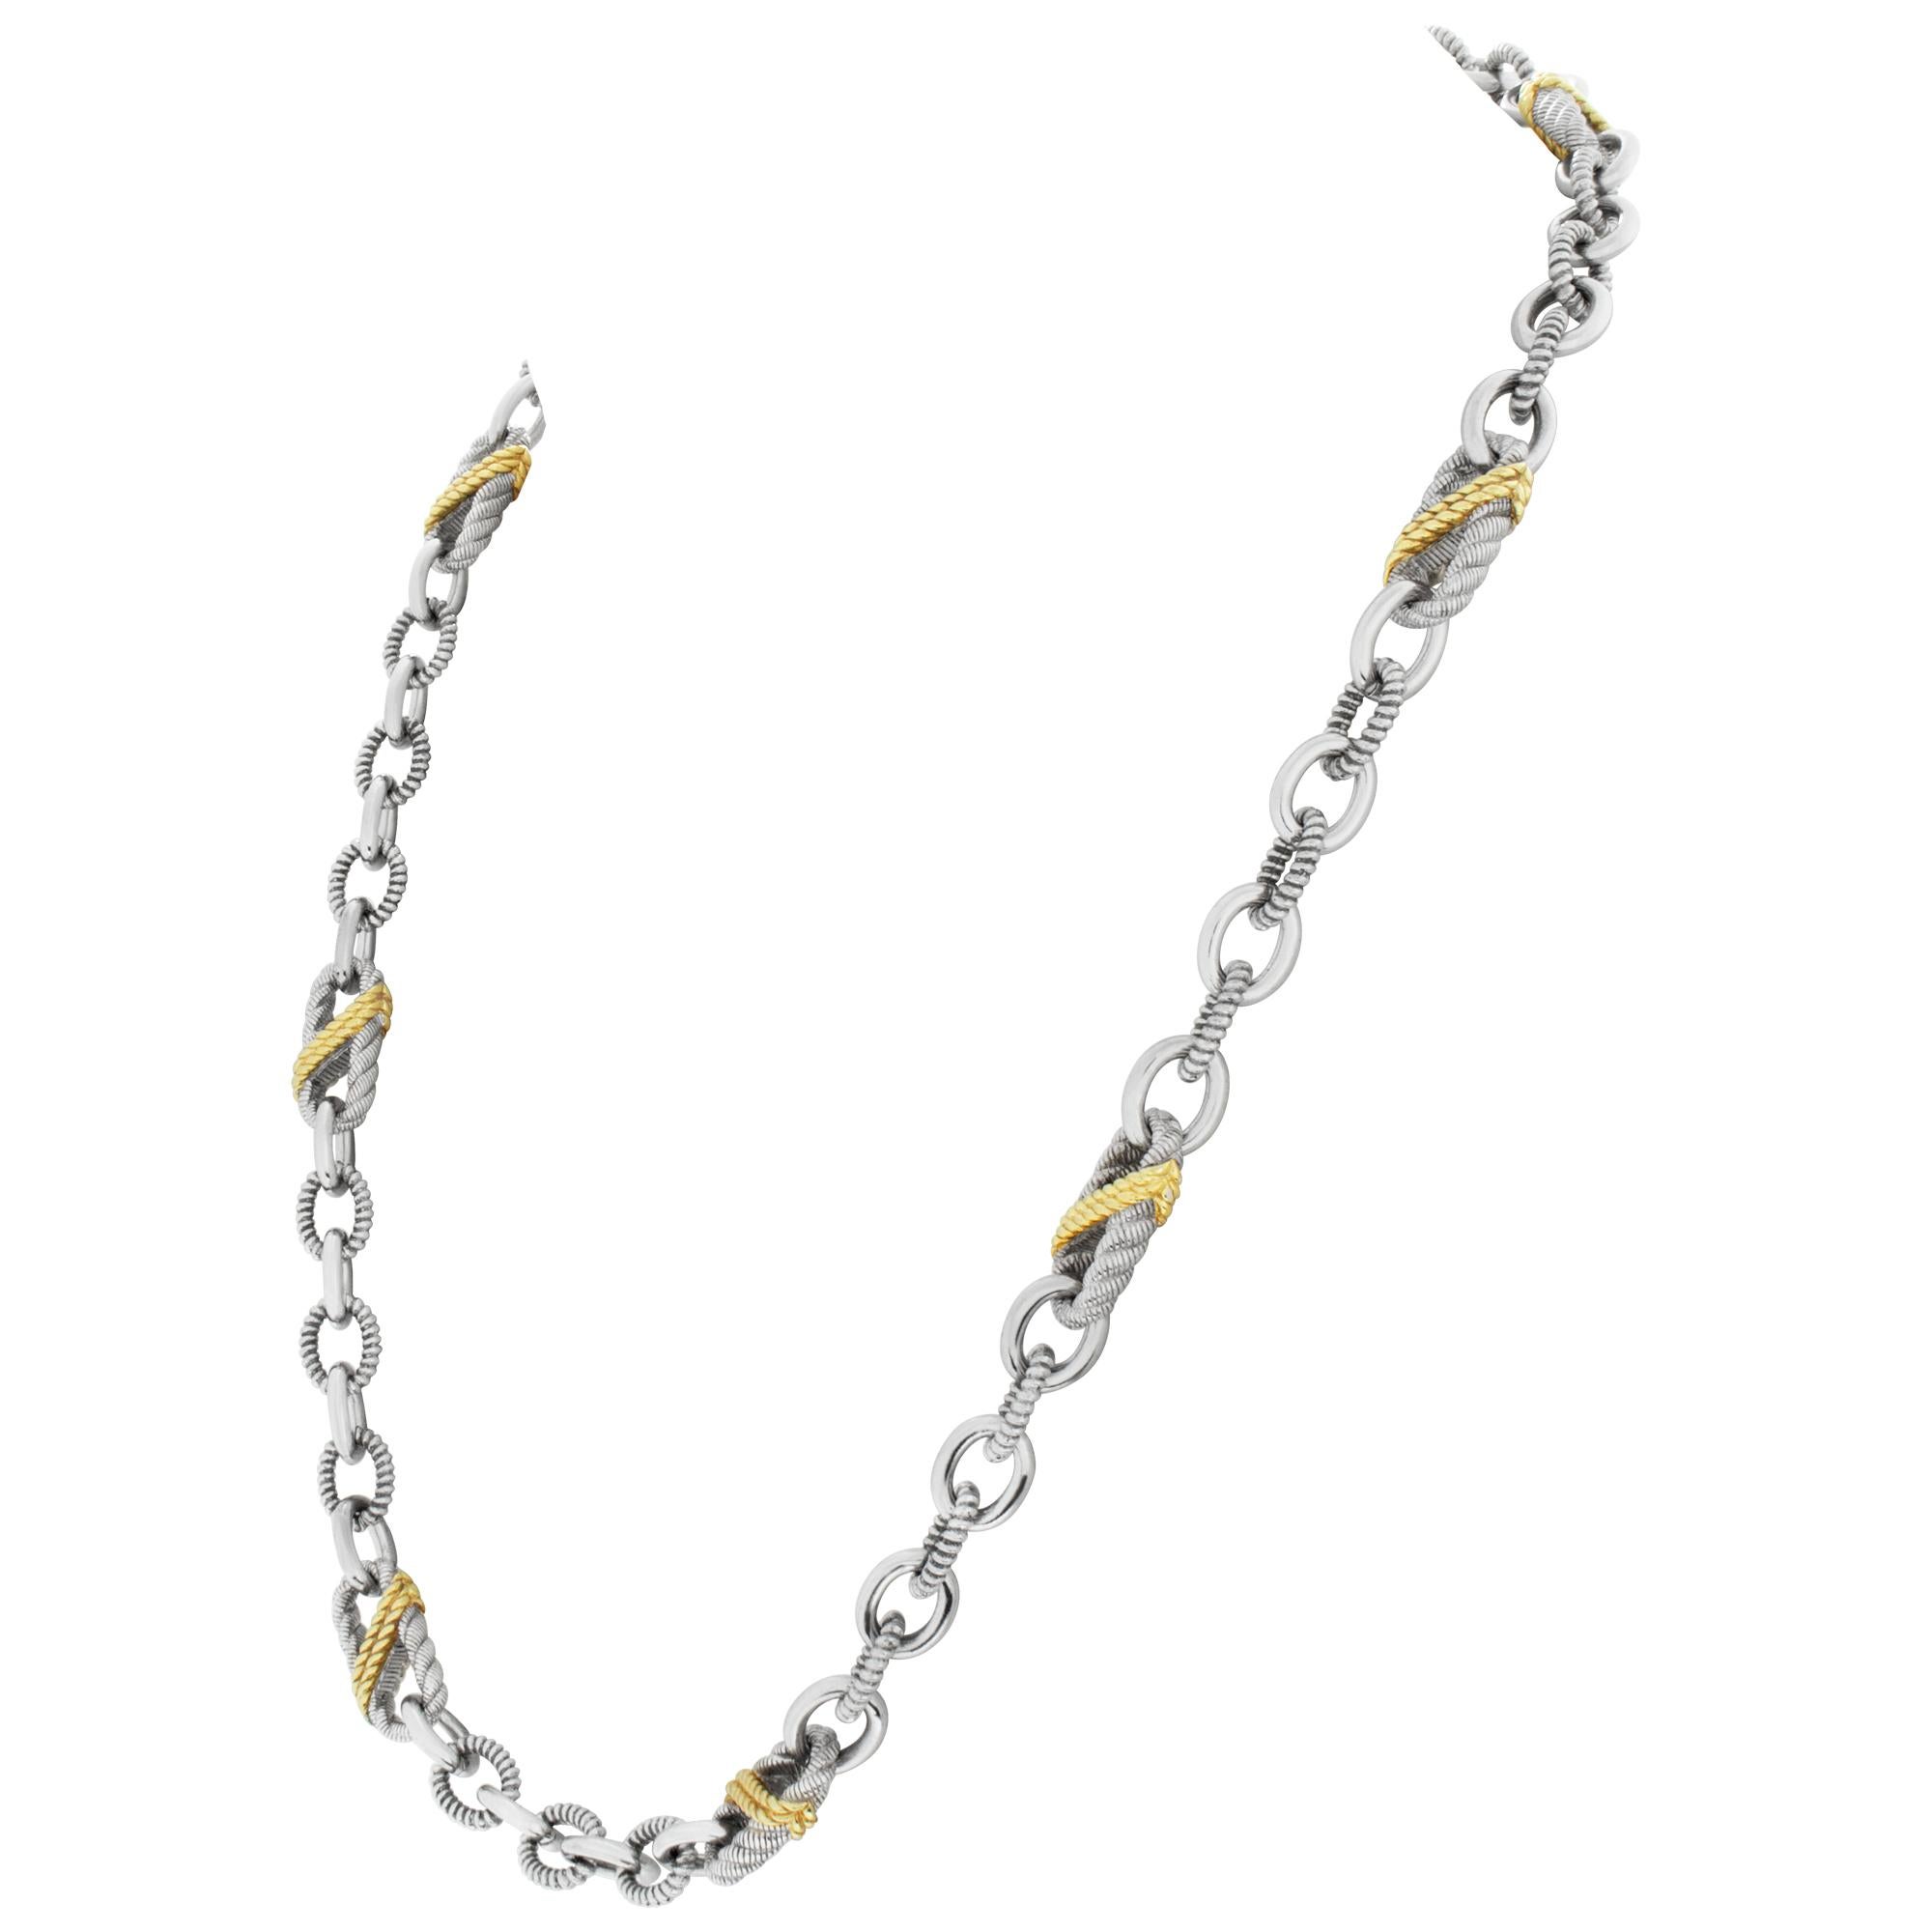 Judith Ripka twisted oval link two-tone chain in sterling silver with accent CZ stones on the spear pendant. Length 20 inches, width 8mm.
